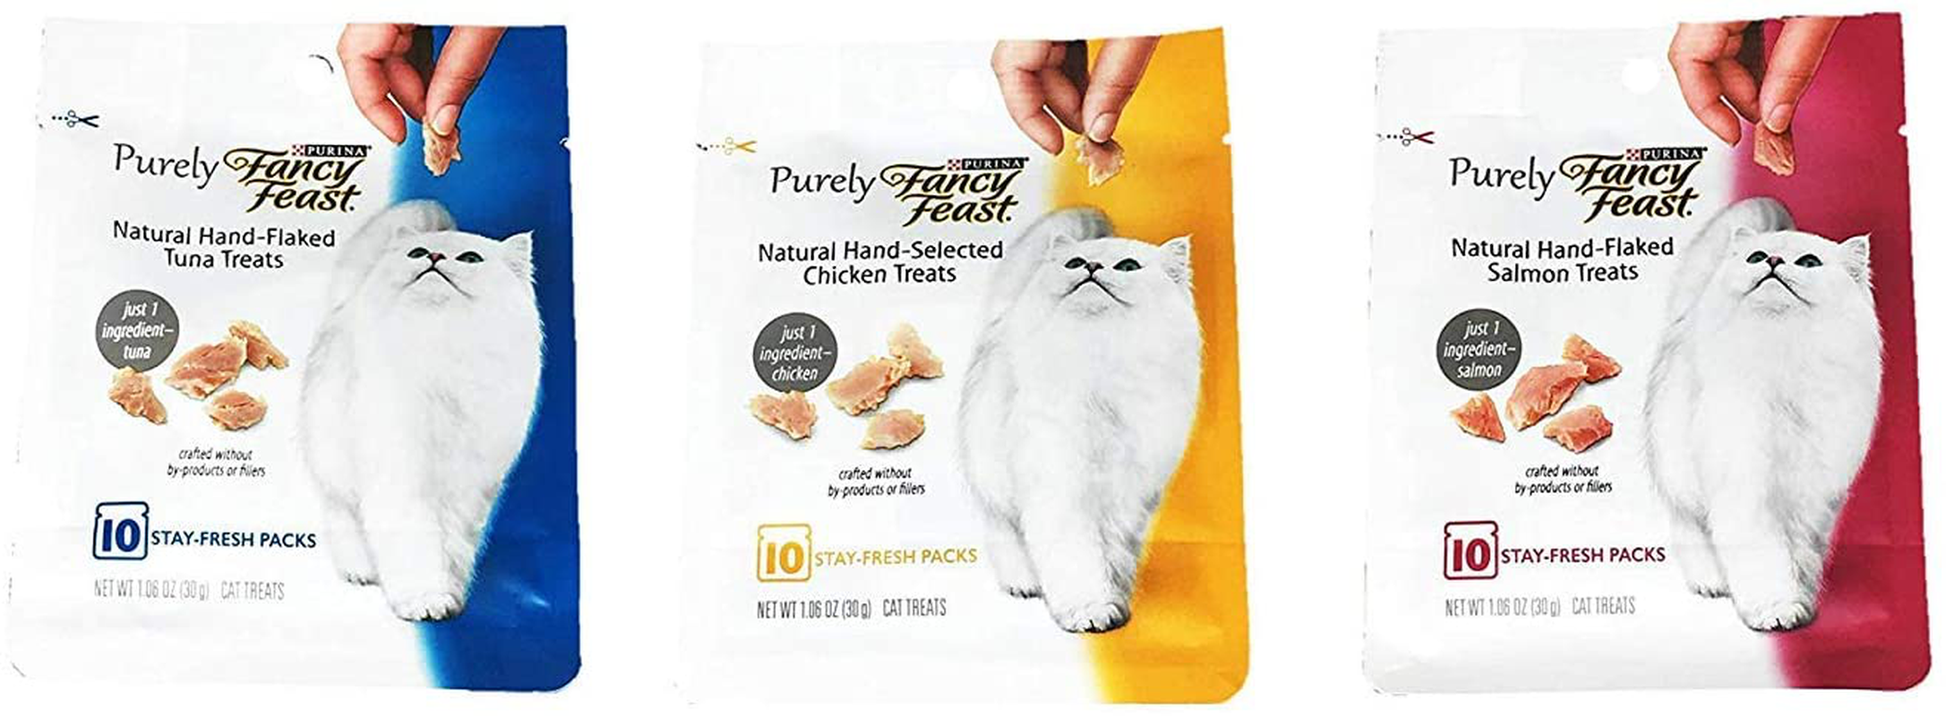 Purina Purely Fancy Feast Natural Hand-Flaked Cat Treats Variety Pack Bundle of 3 Flavors (Tuna, Chicken, and Salmon; 1.06 Oz Each) Animals & Pet Supplies > Pet Supplies > Cat Supplies > Cat Treats Purina Purely Fancy Feast   